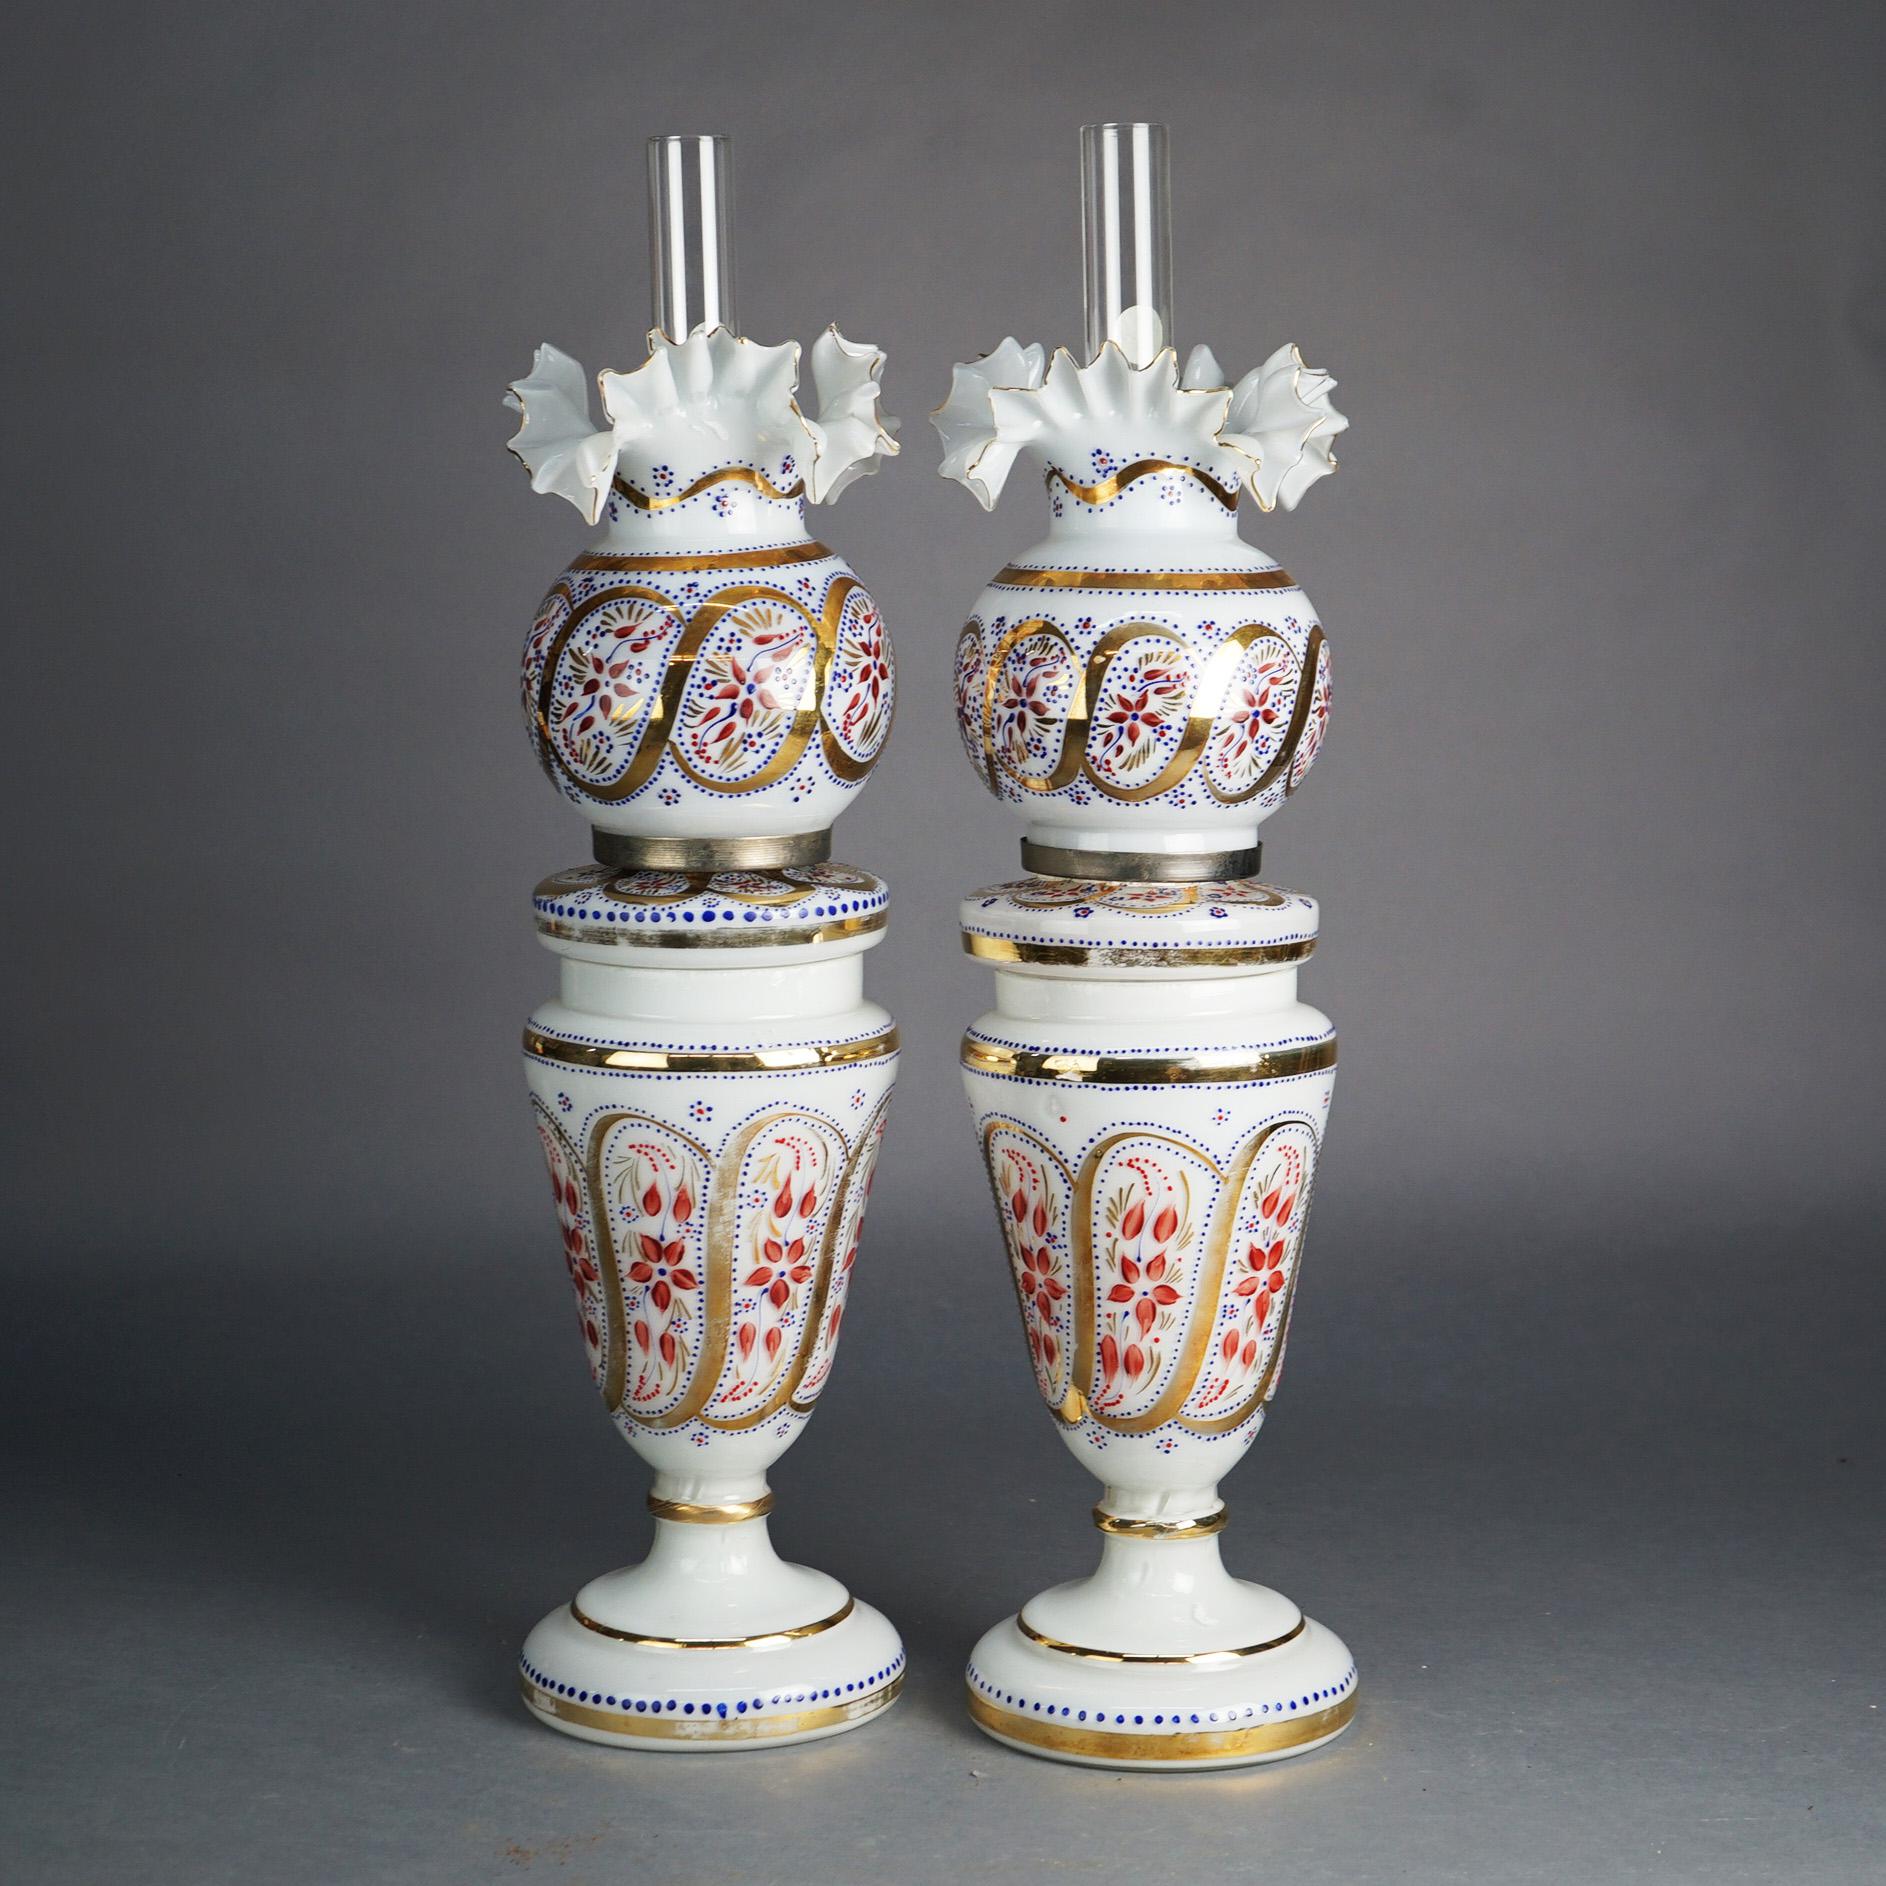 Antique Matching Pair of Opaline Floral Enameled Hand Painted & Gilt Oil Lamps with Handkerchief Shades, c1890

Measures- 27.5''H x 7''W x 7''D